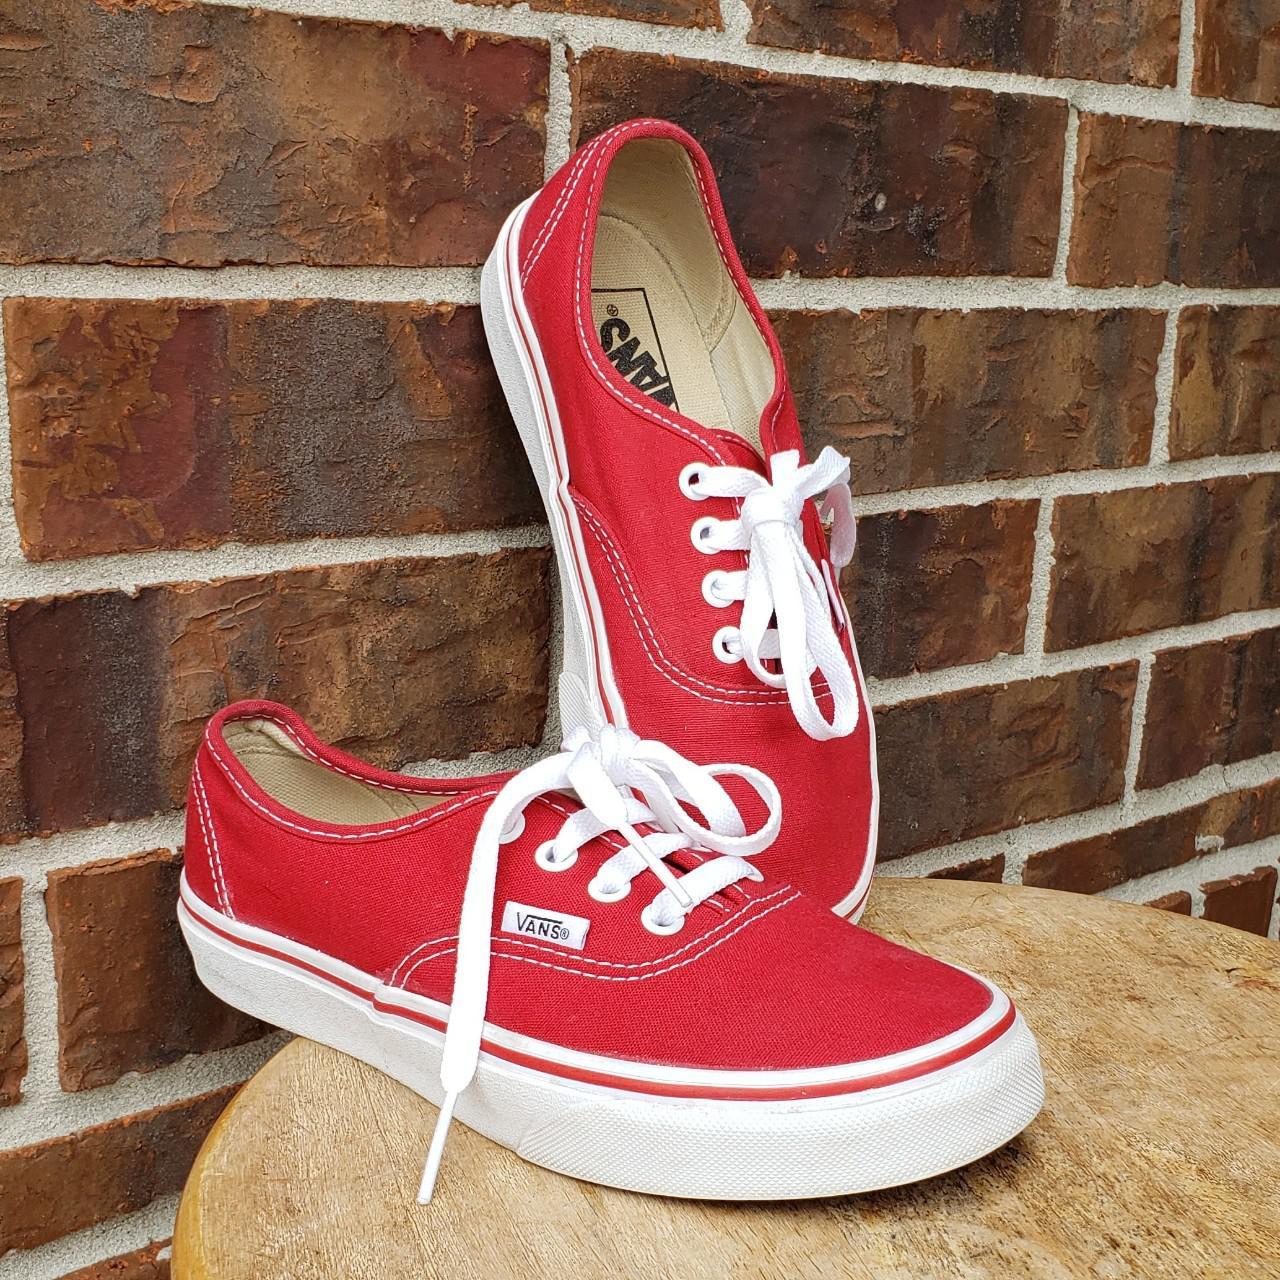 Vans Women's White and Red